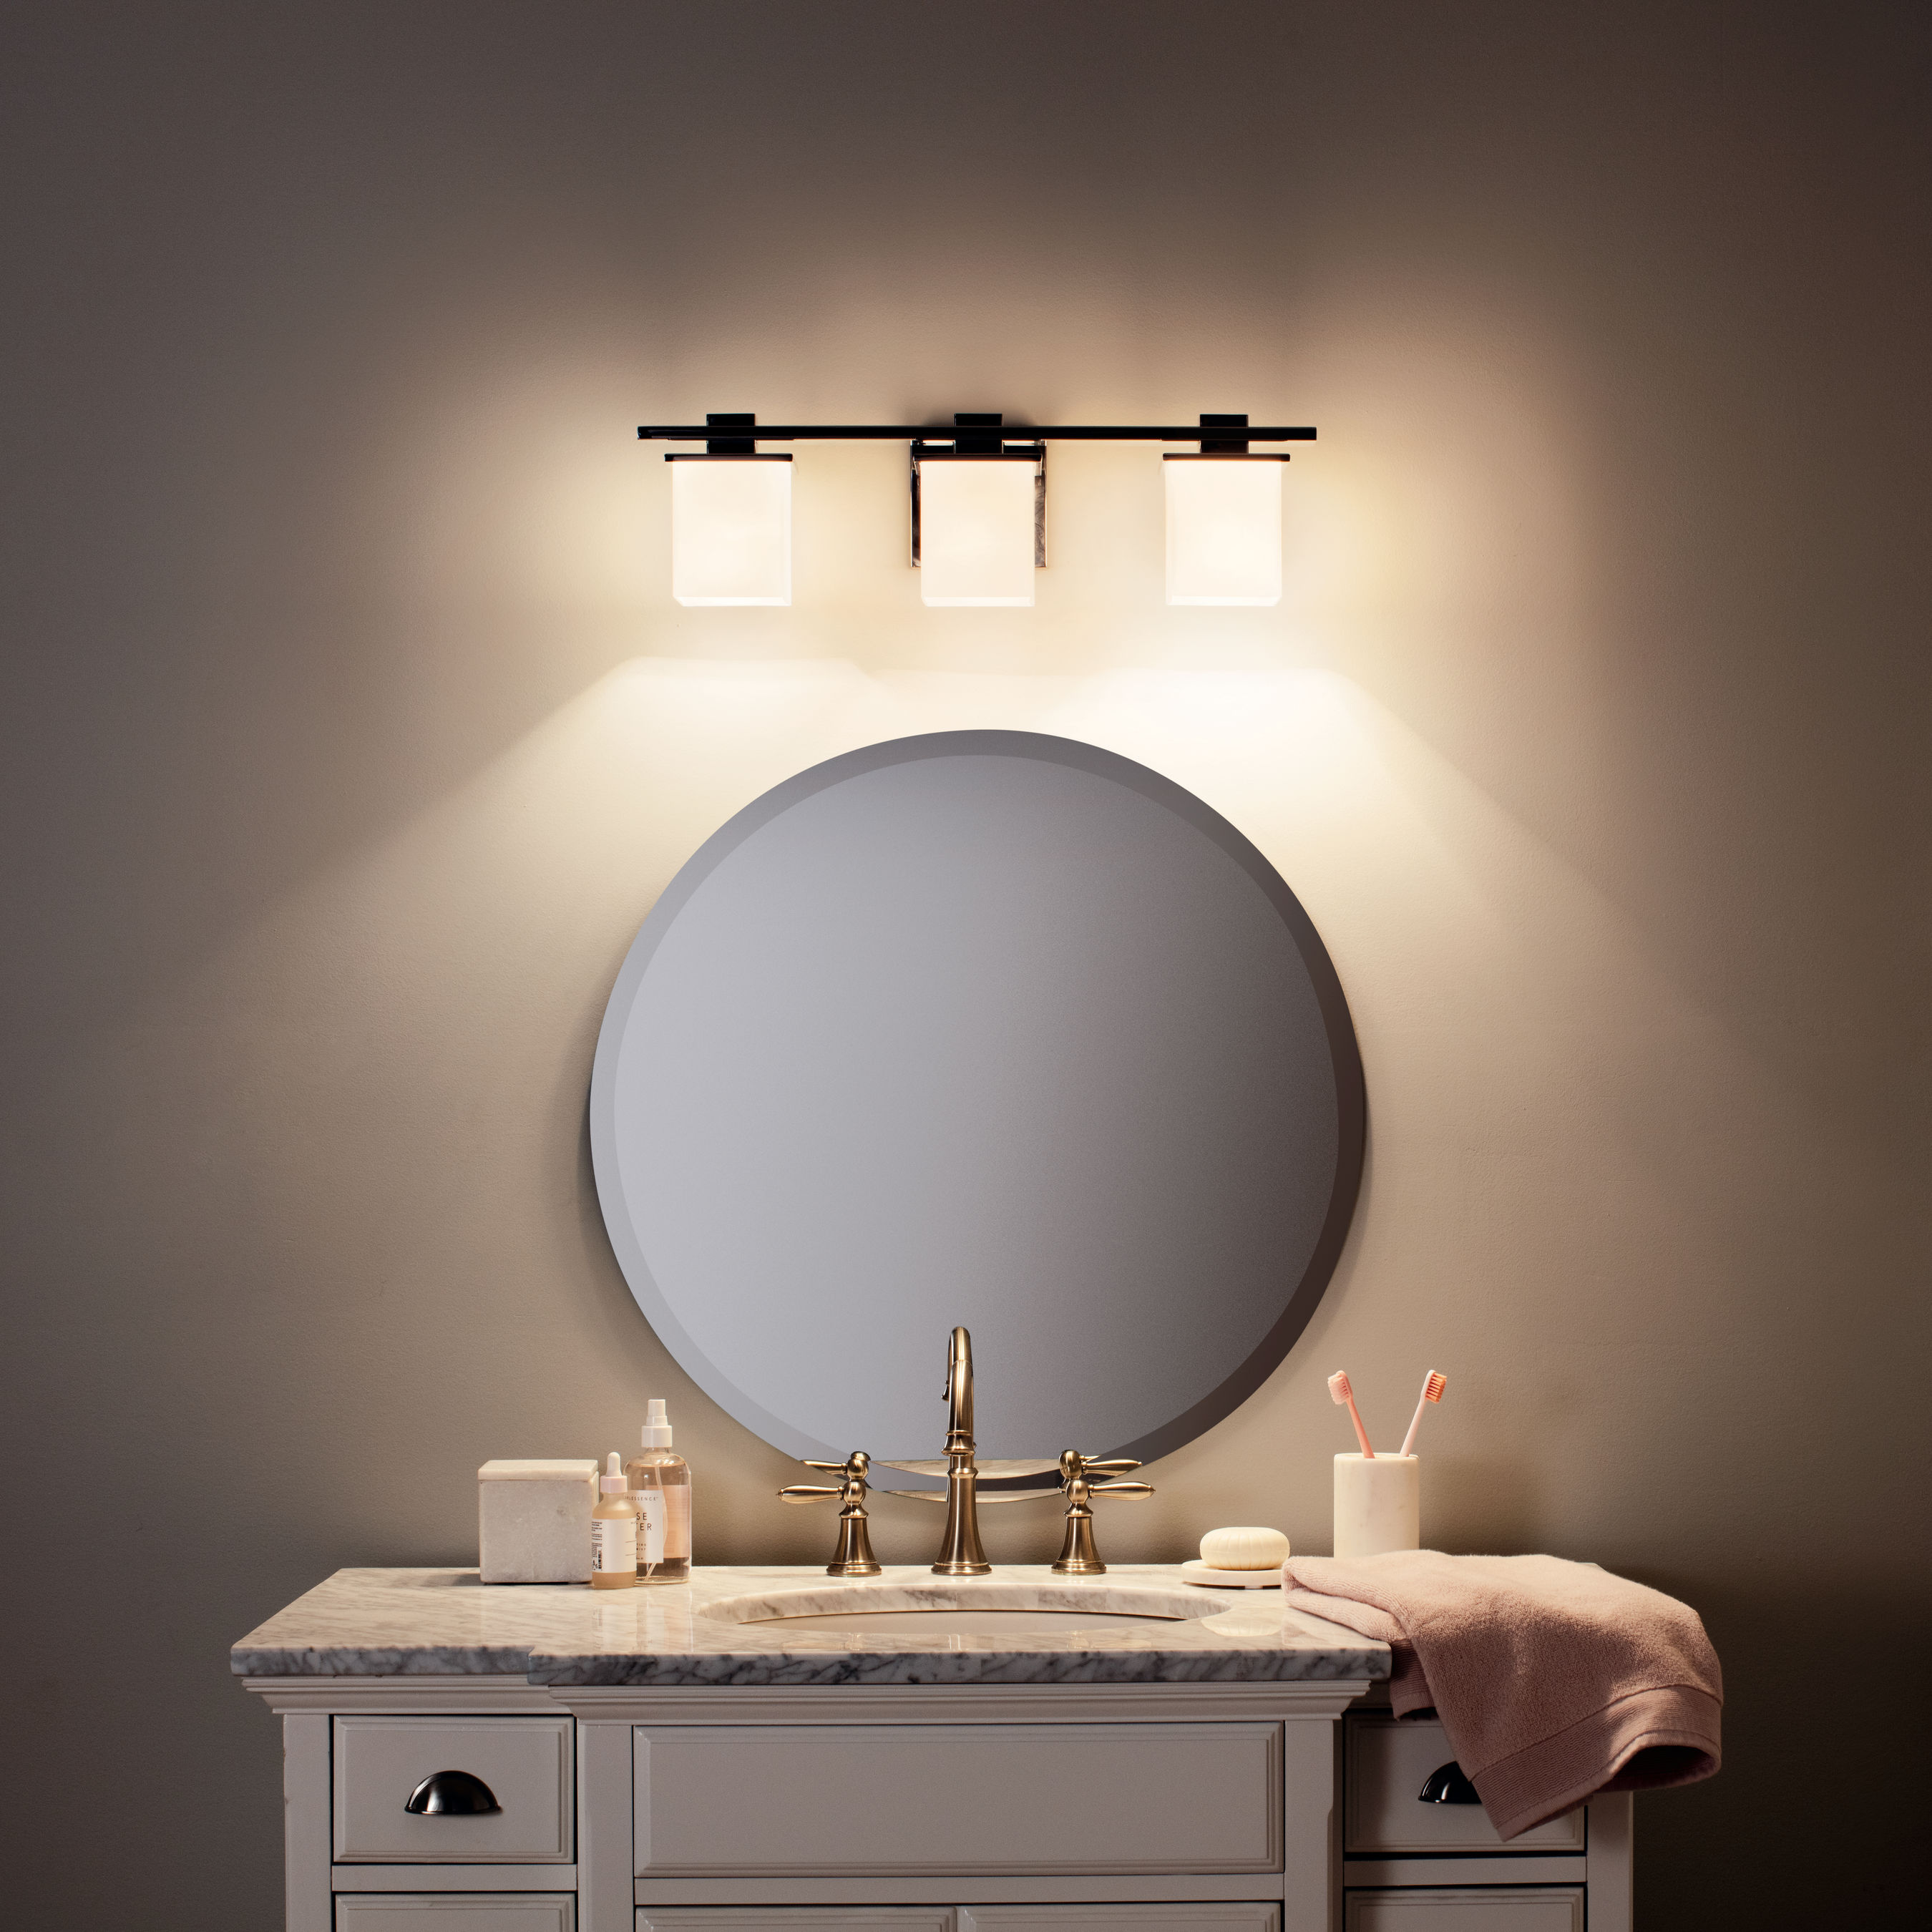 Details about   Kichler Tully 2-Light Chrome Modern/Contemporary Vanity Light 45150CH 